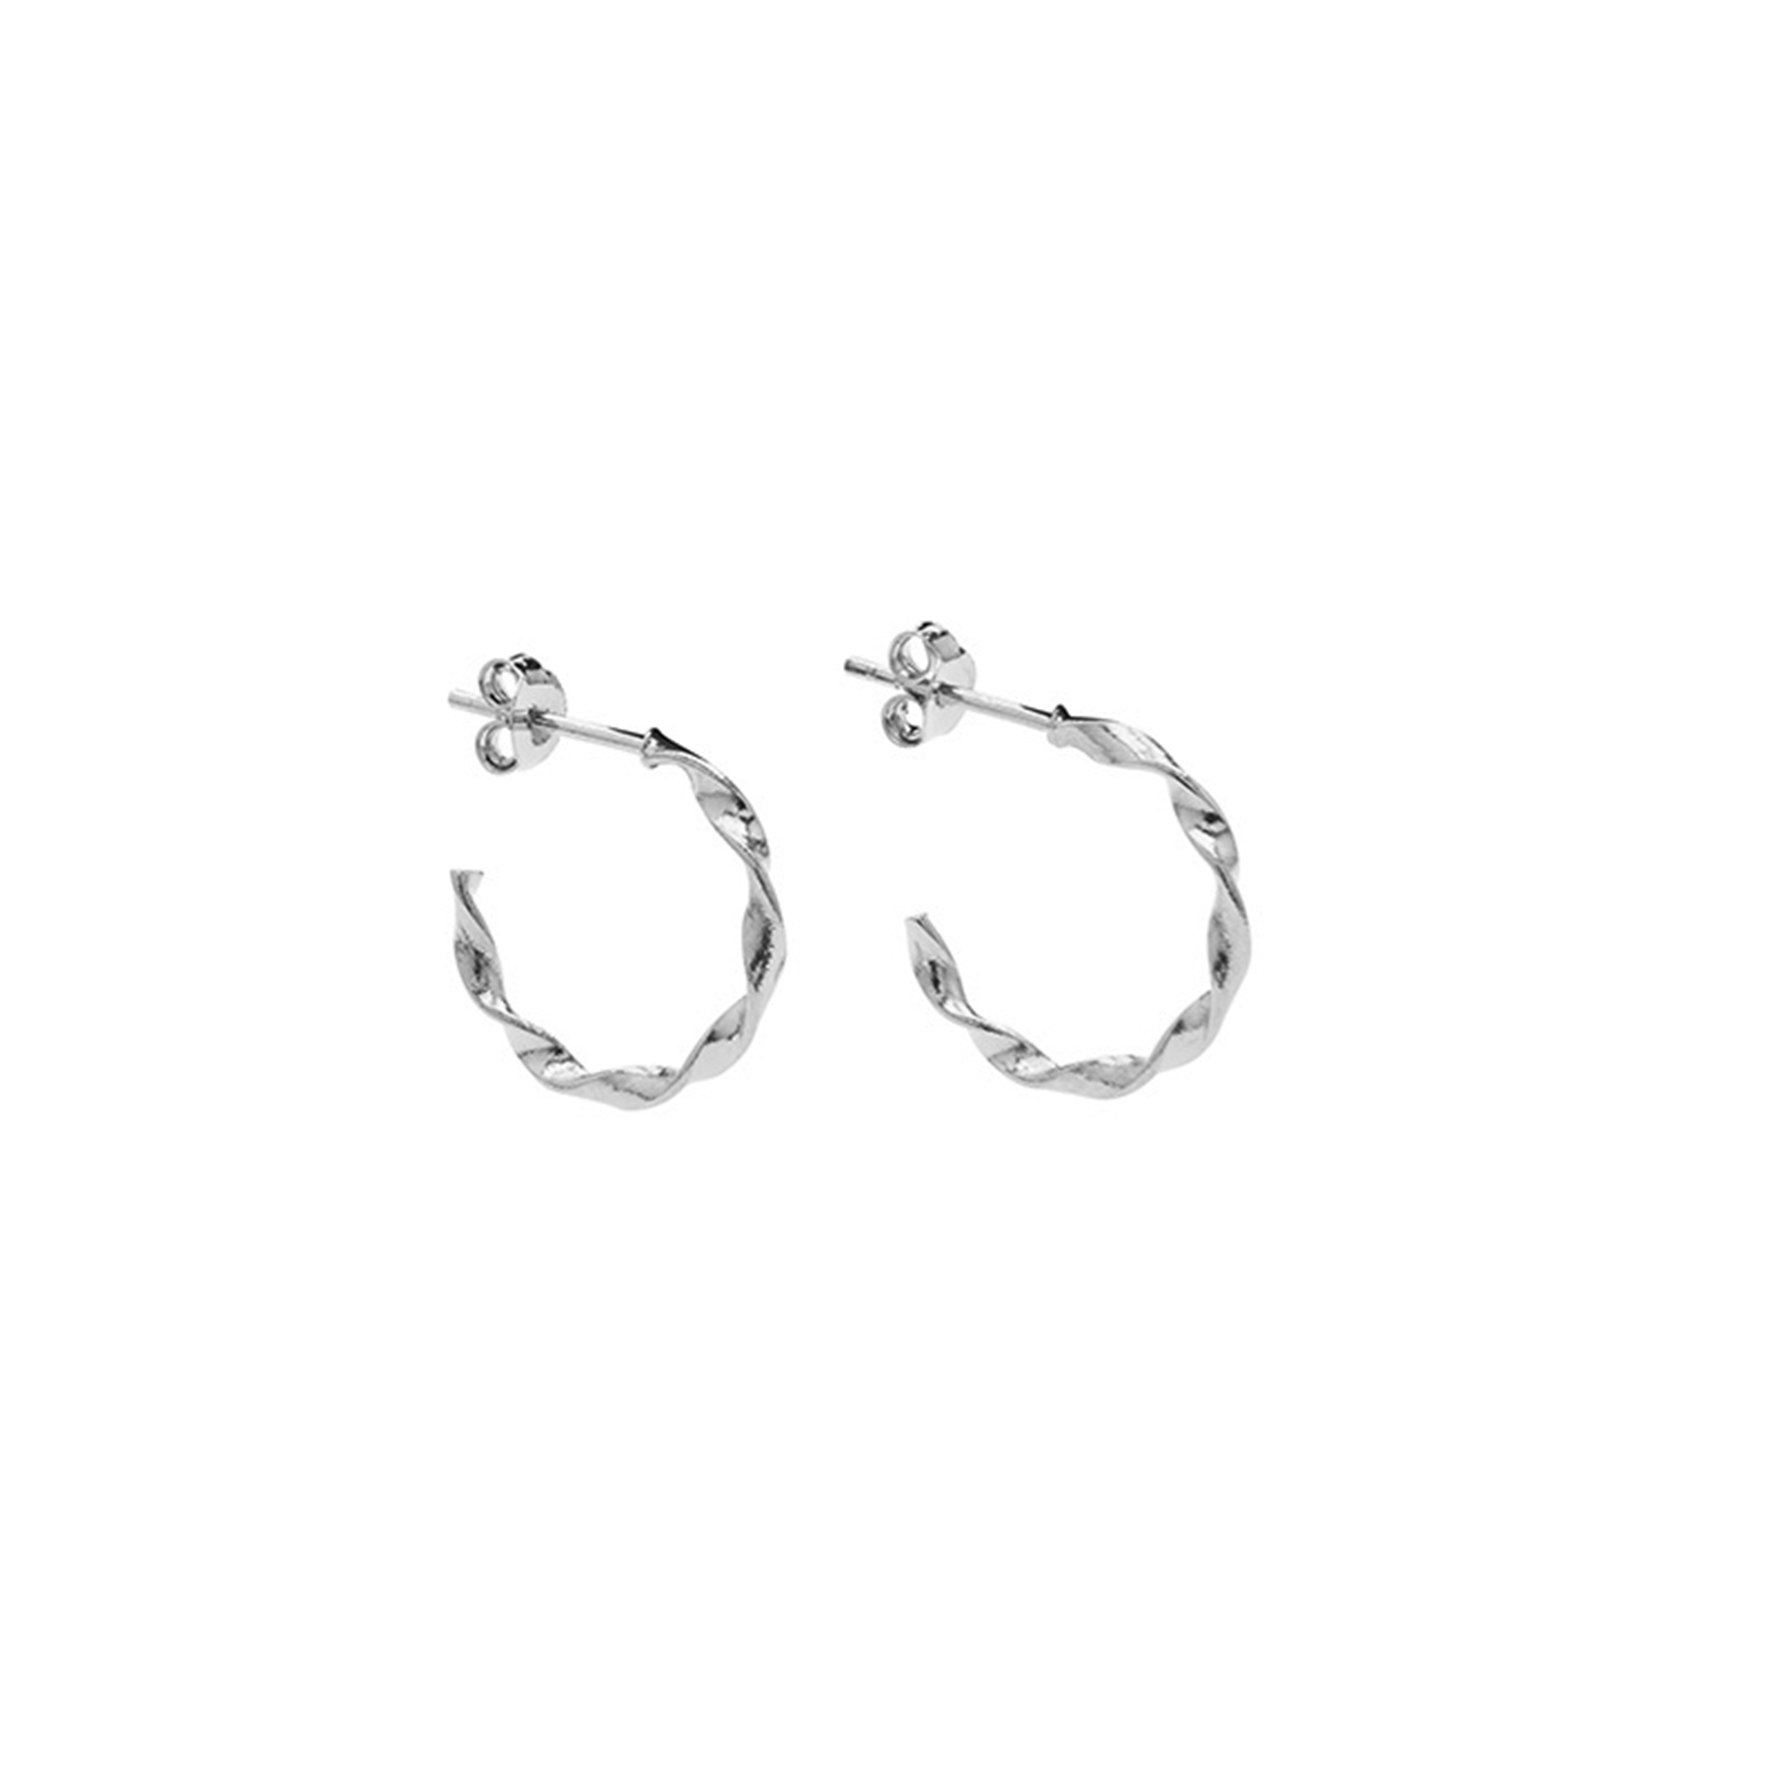 Alfie Studs from Pico in Silverplated Brass